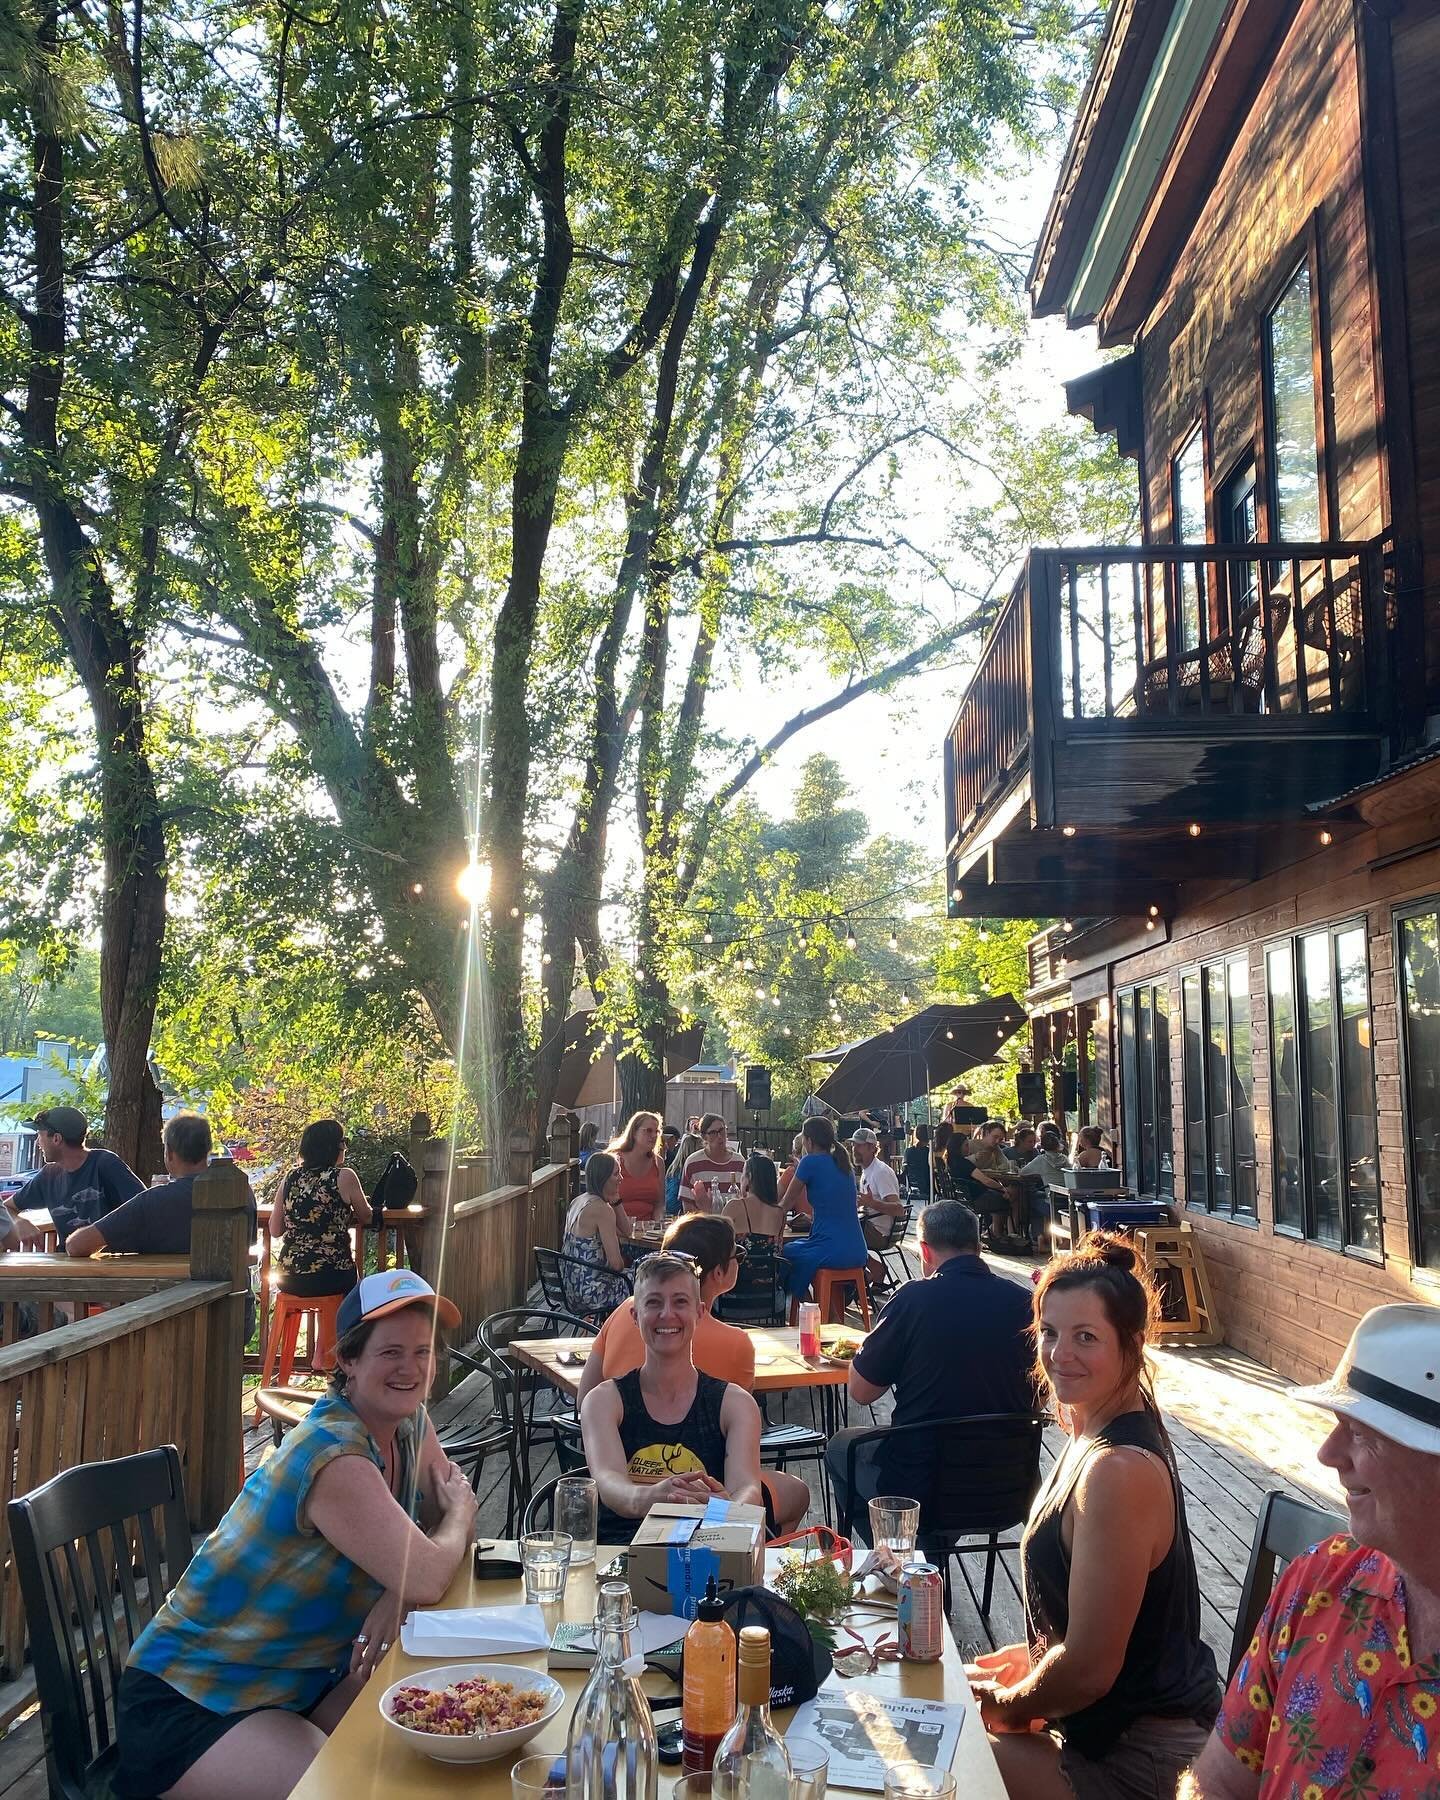 Hi! Yes! Tonight kicks off the summer series of Big Deck Thursdays 💫🎶🎤🎸

Music starts at 6 and goes till closing, at 8.

We plan to have music every Thursday for the whole summer, as long as weather and air quality permits.

Be forewarned - our d